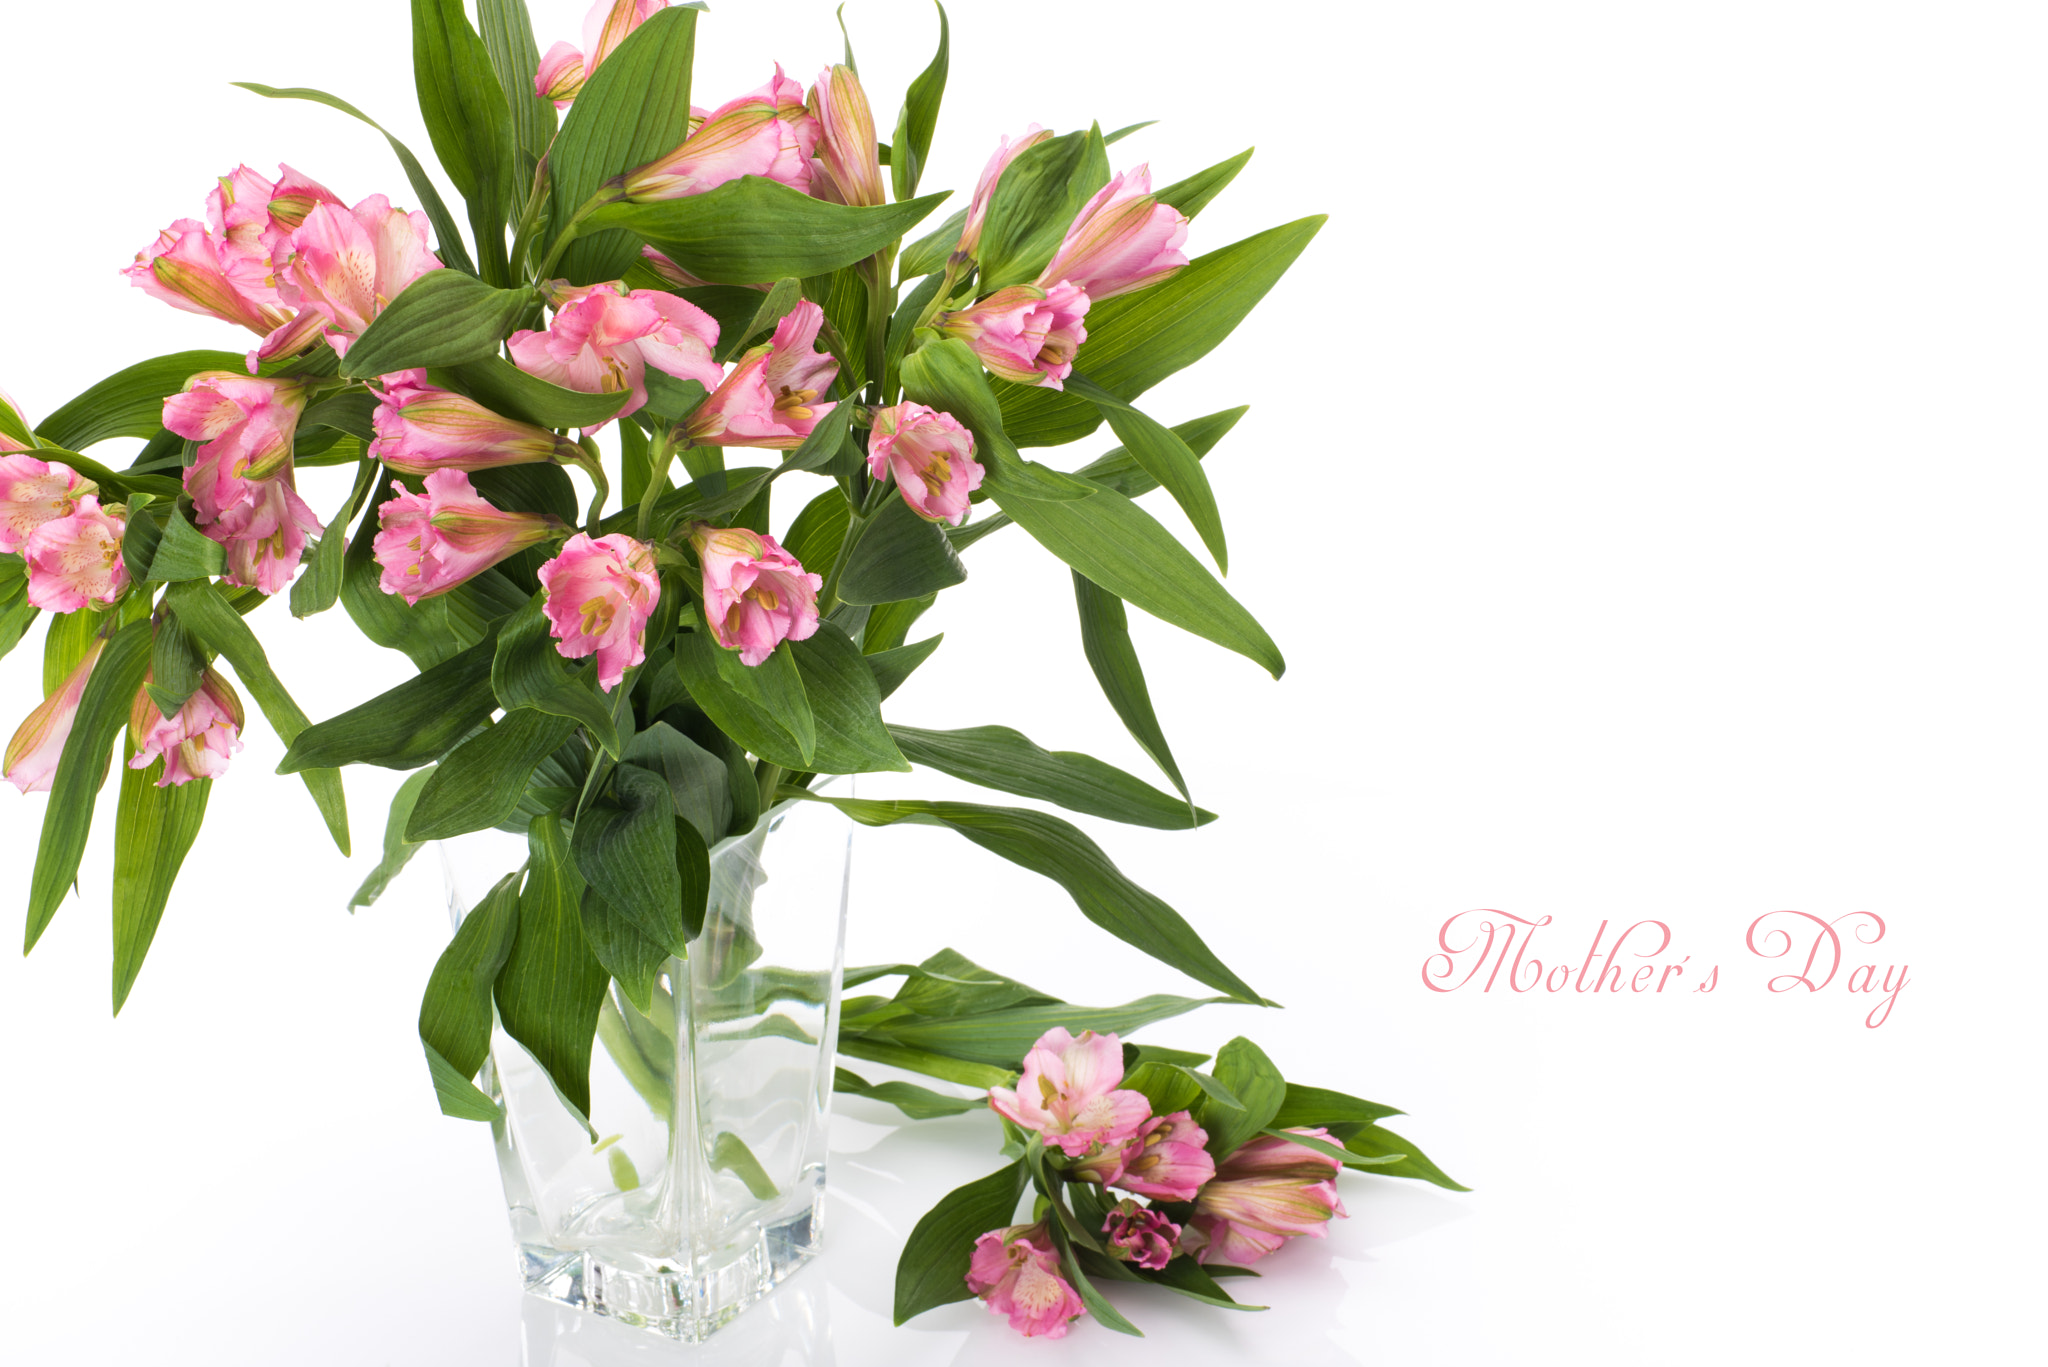 Nikon D810 sample photo. Fresh spring flowers as a holiday postcard design with copy space on white background photography